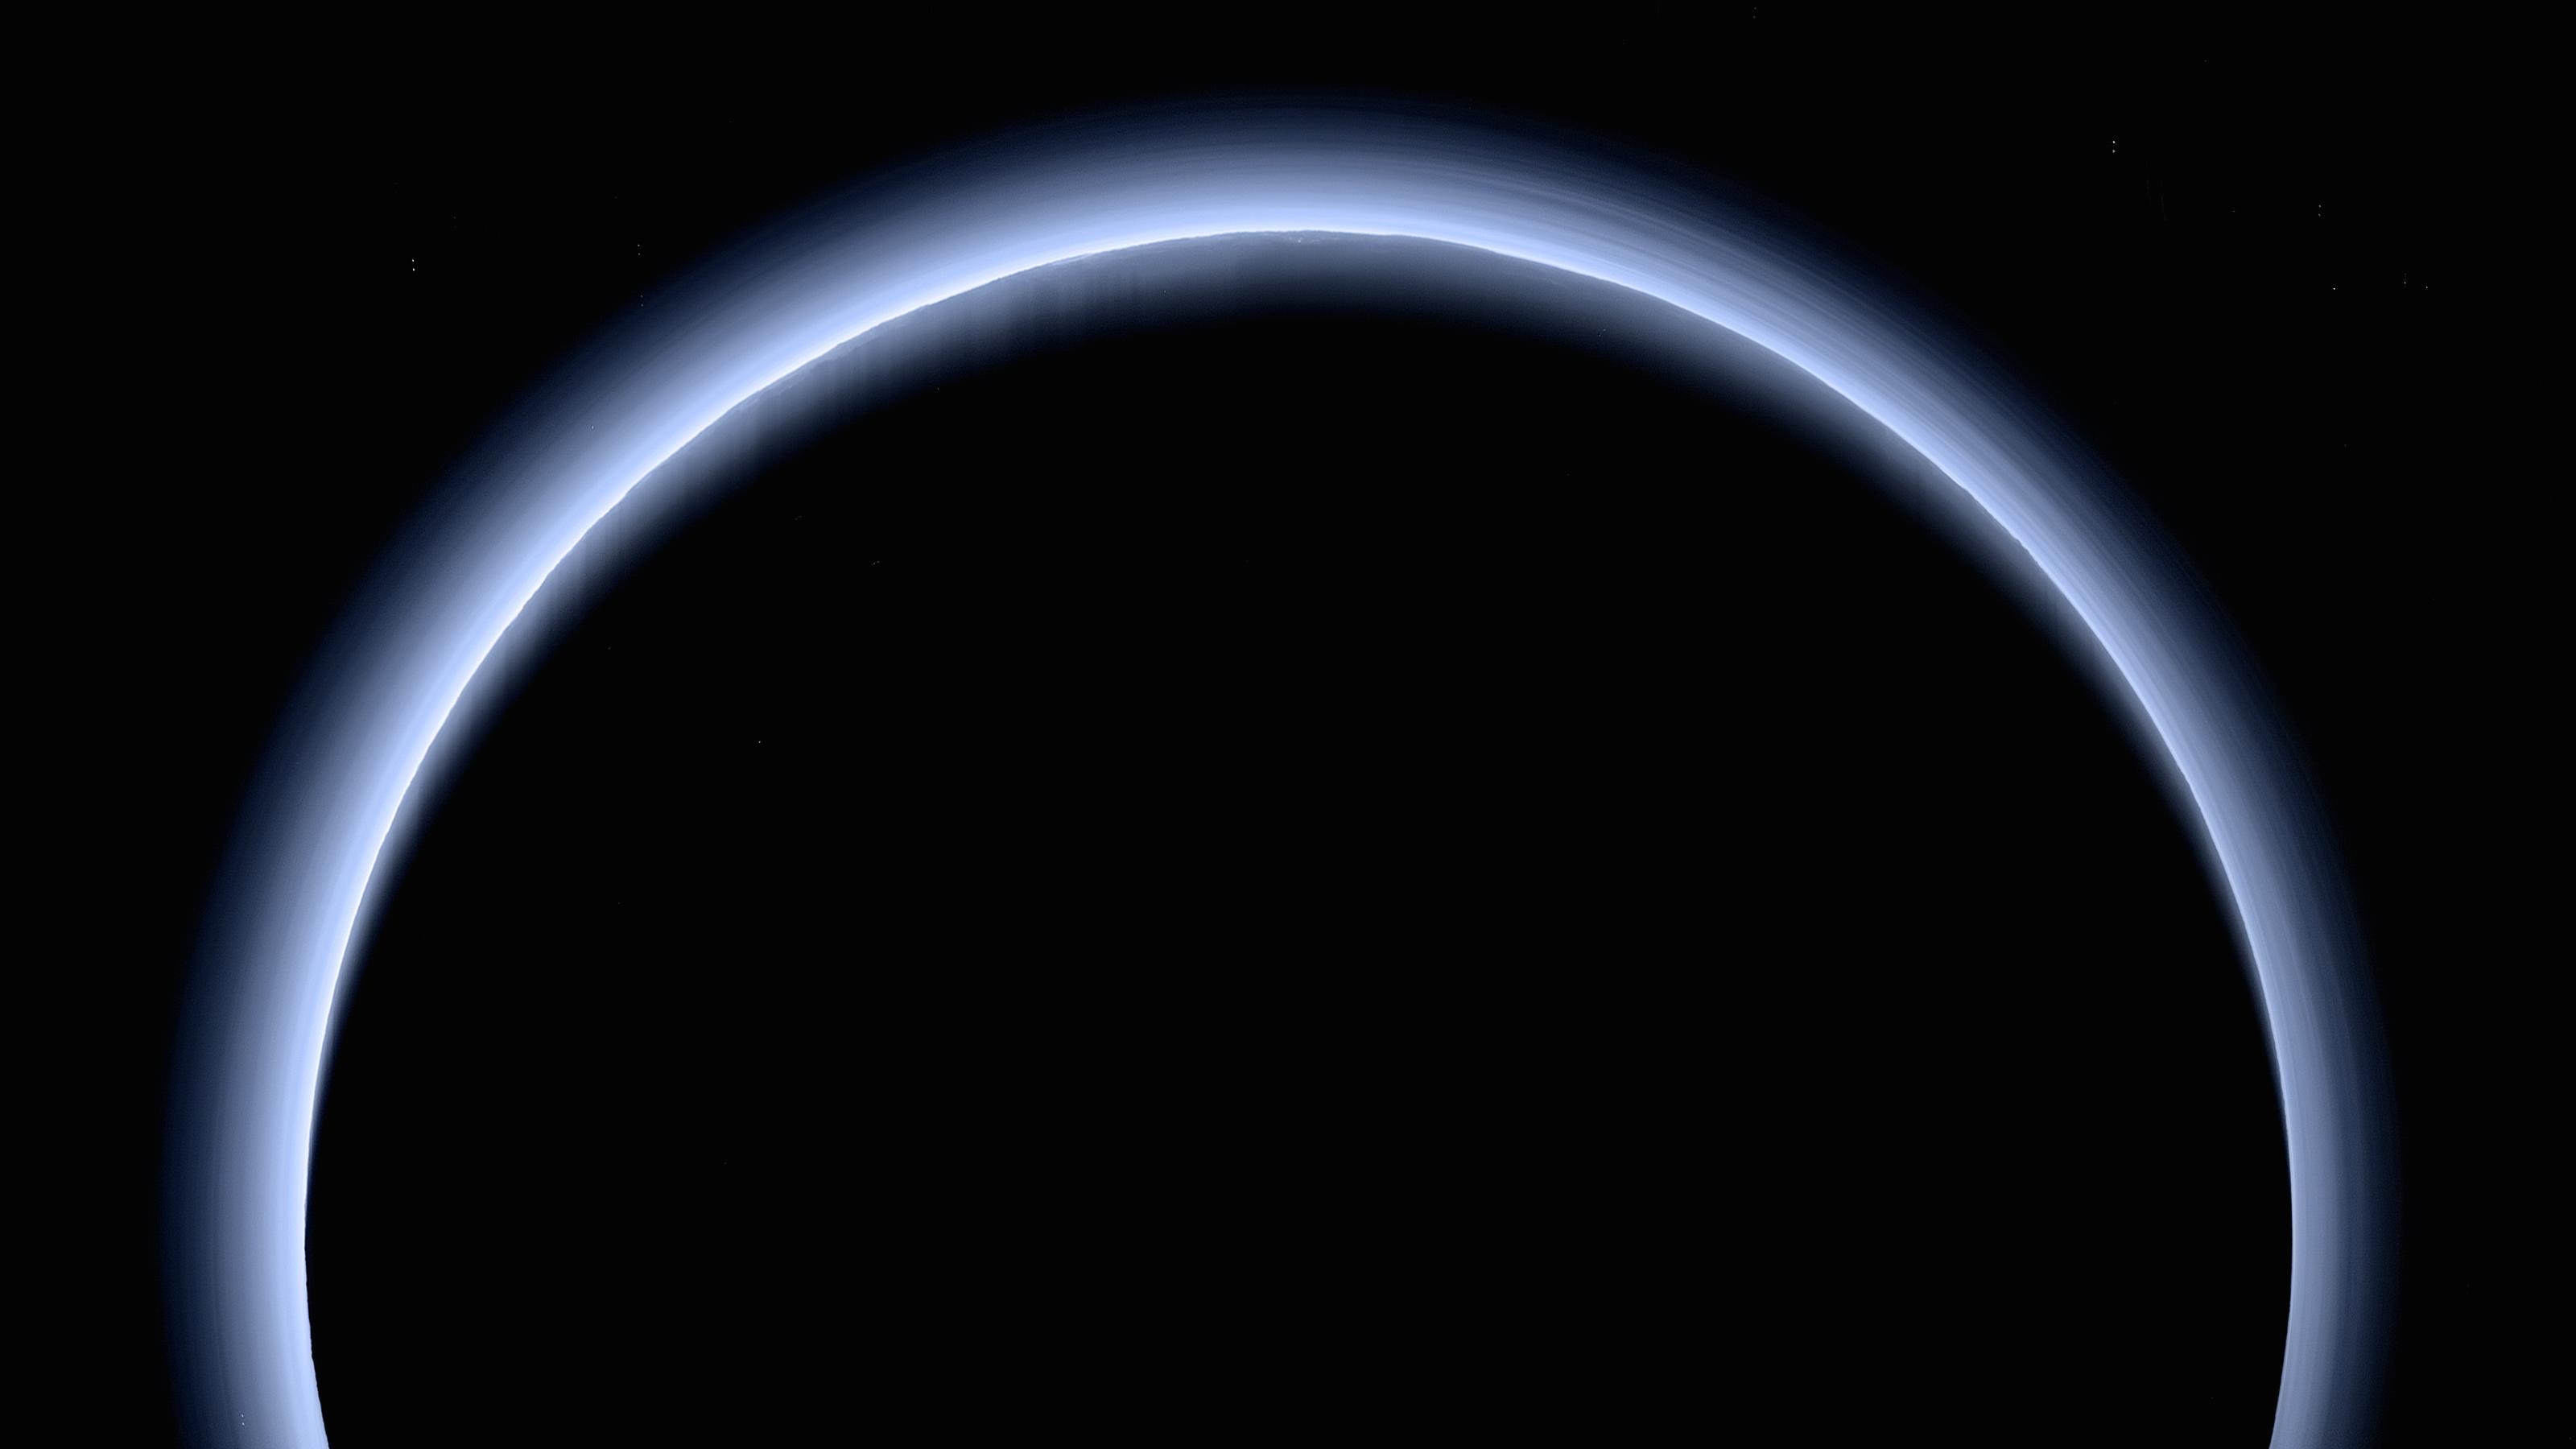 This is the highest-resolution color departure shot of Pluto's receding crescent from NASA's New Horizons spacecraft, taken when the spacecraft was 120,000 miles (200,000 kilometers) away from Pluto.